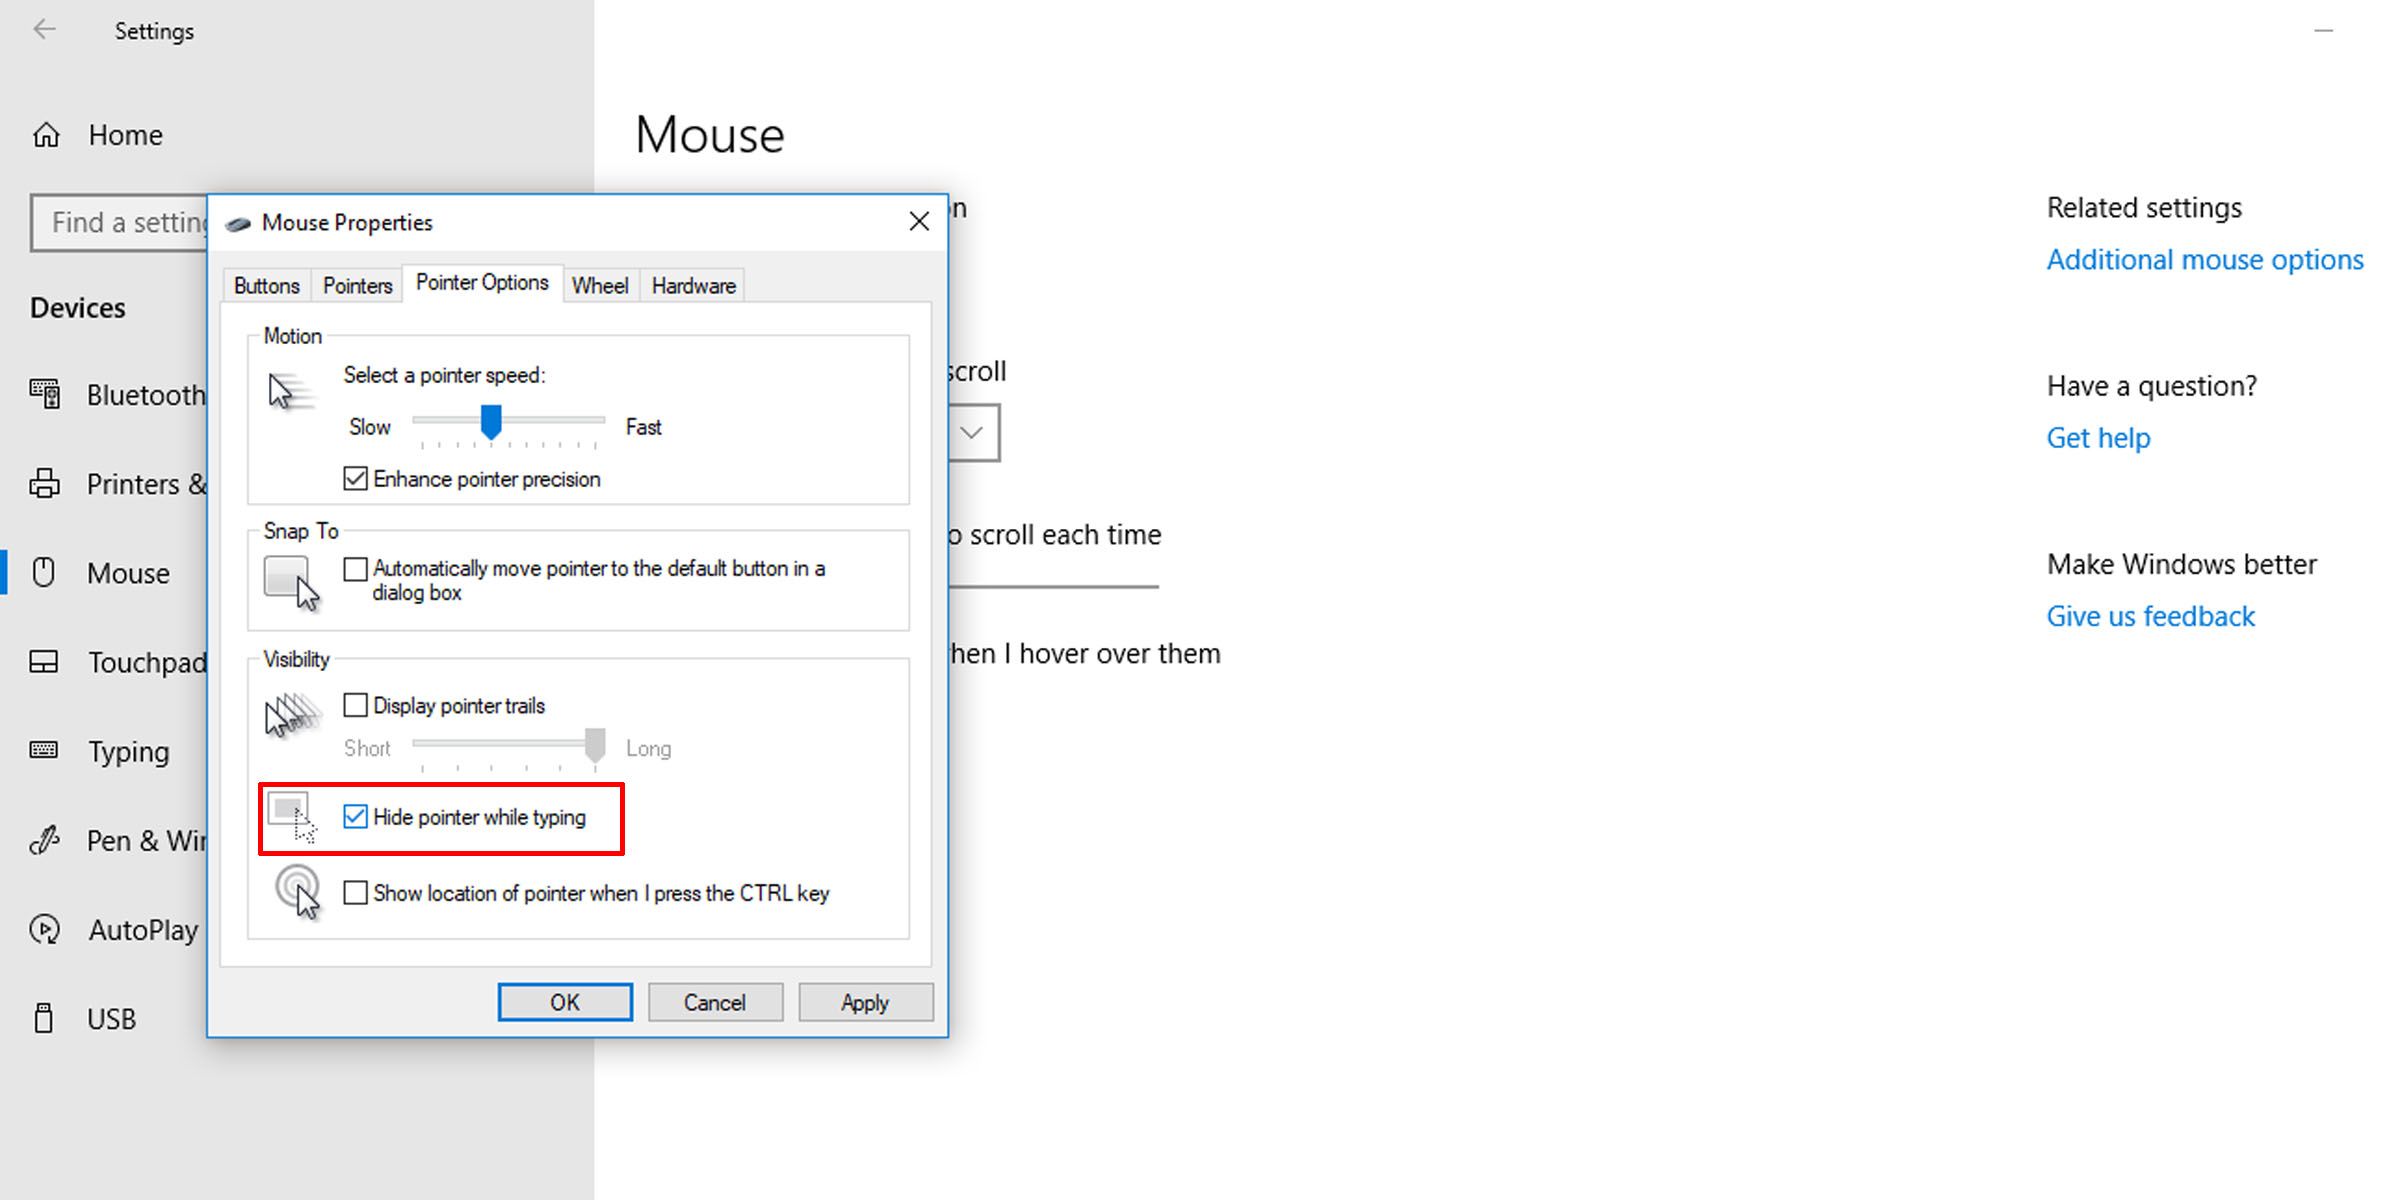 Settings to hide mouse pointer when typing